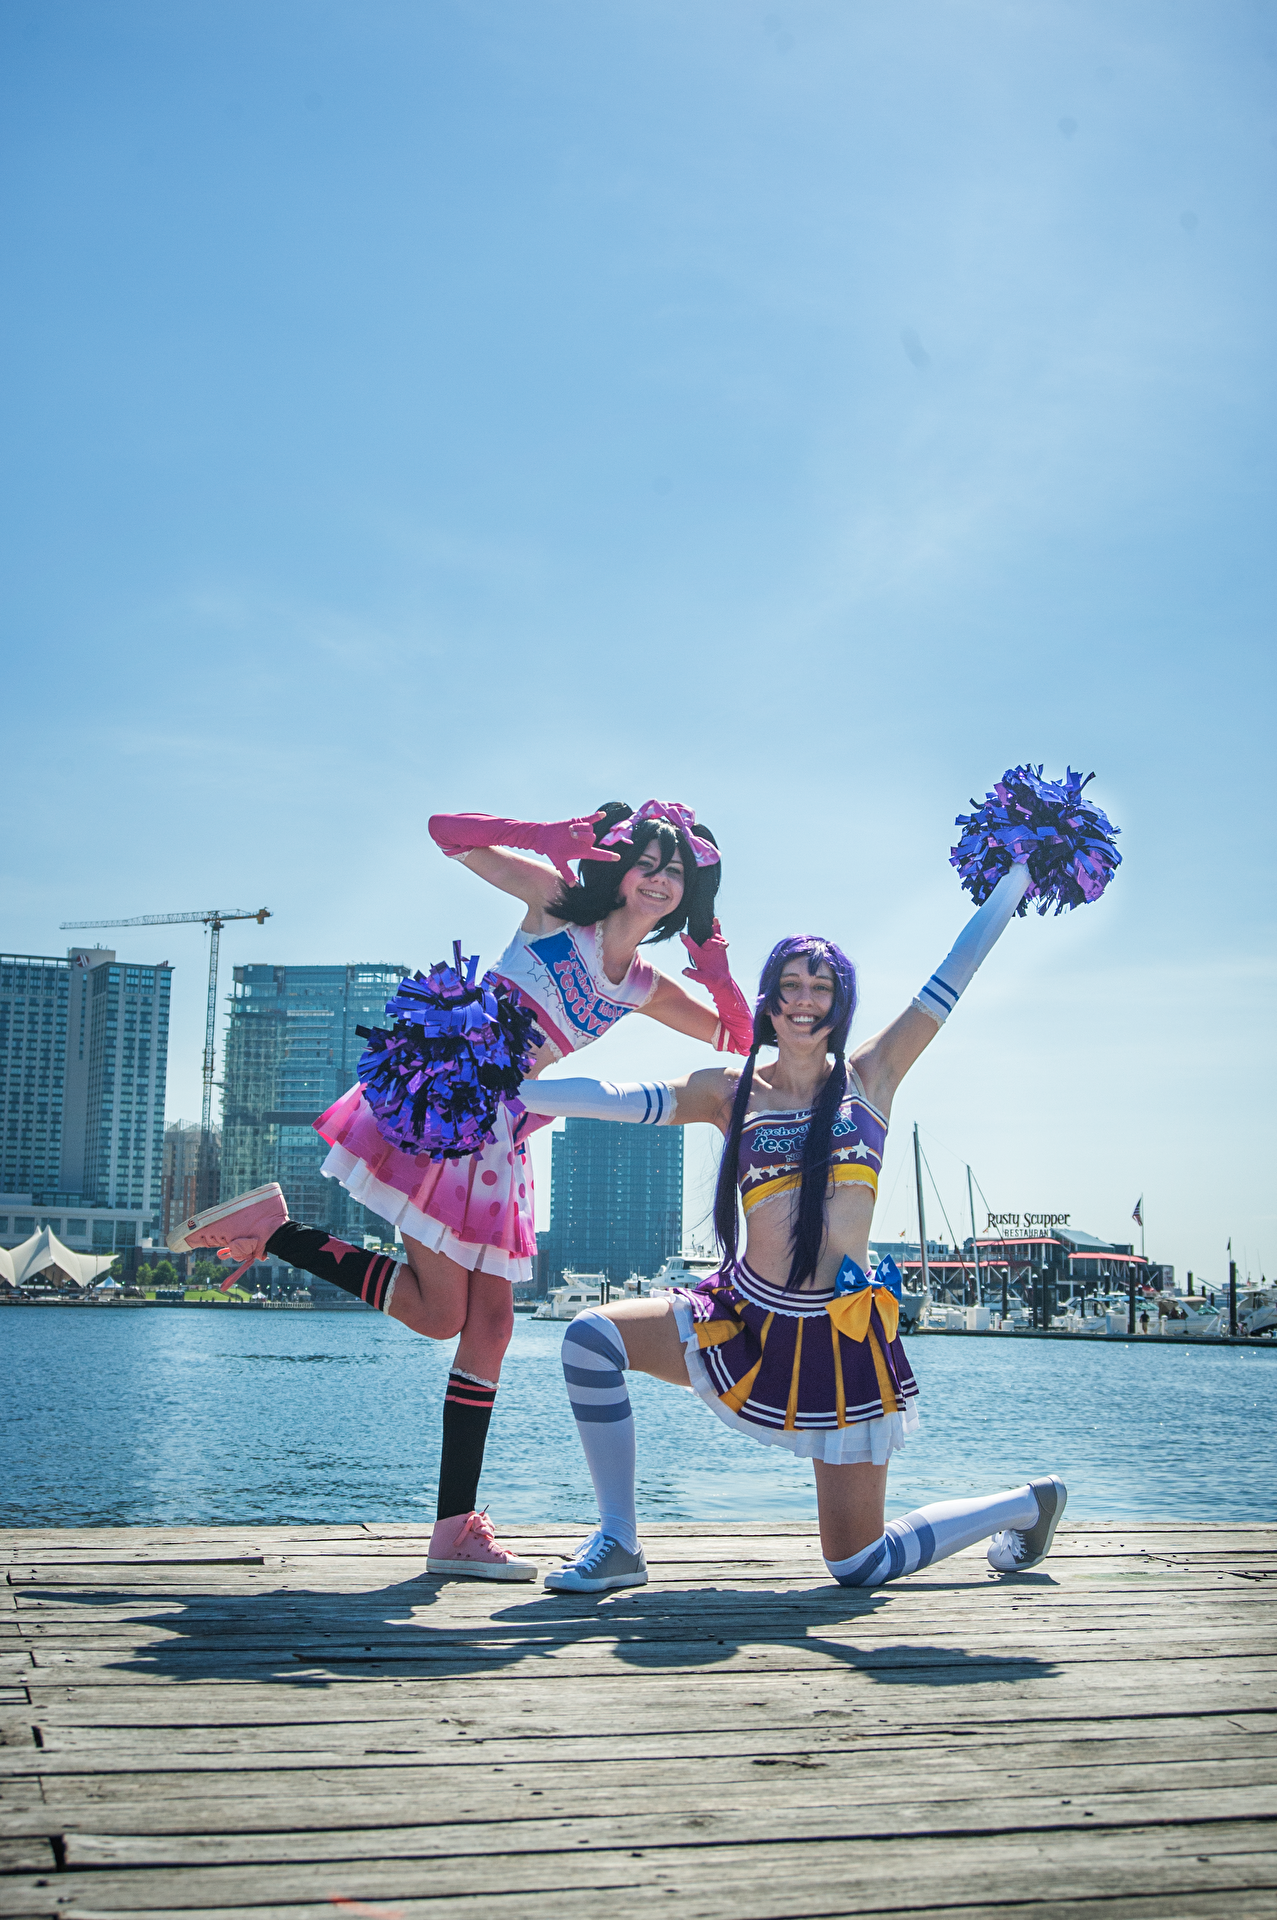 Cospix.net photo featuring Wings of a Dream Cosplay